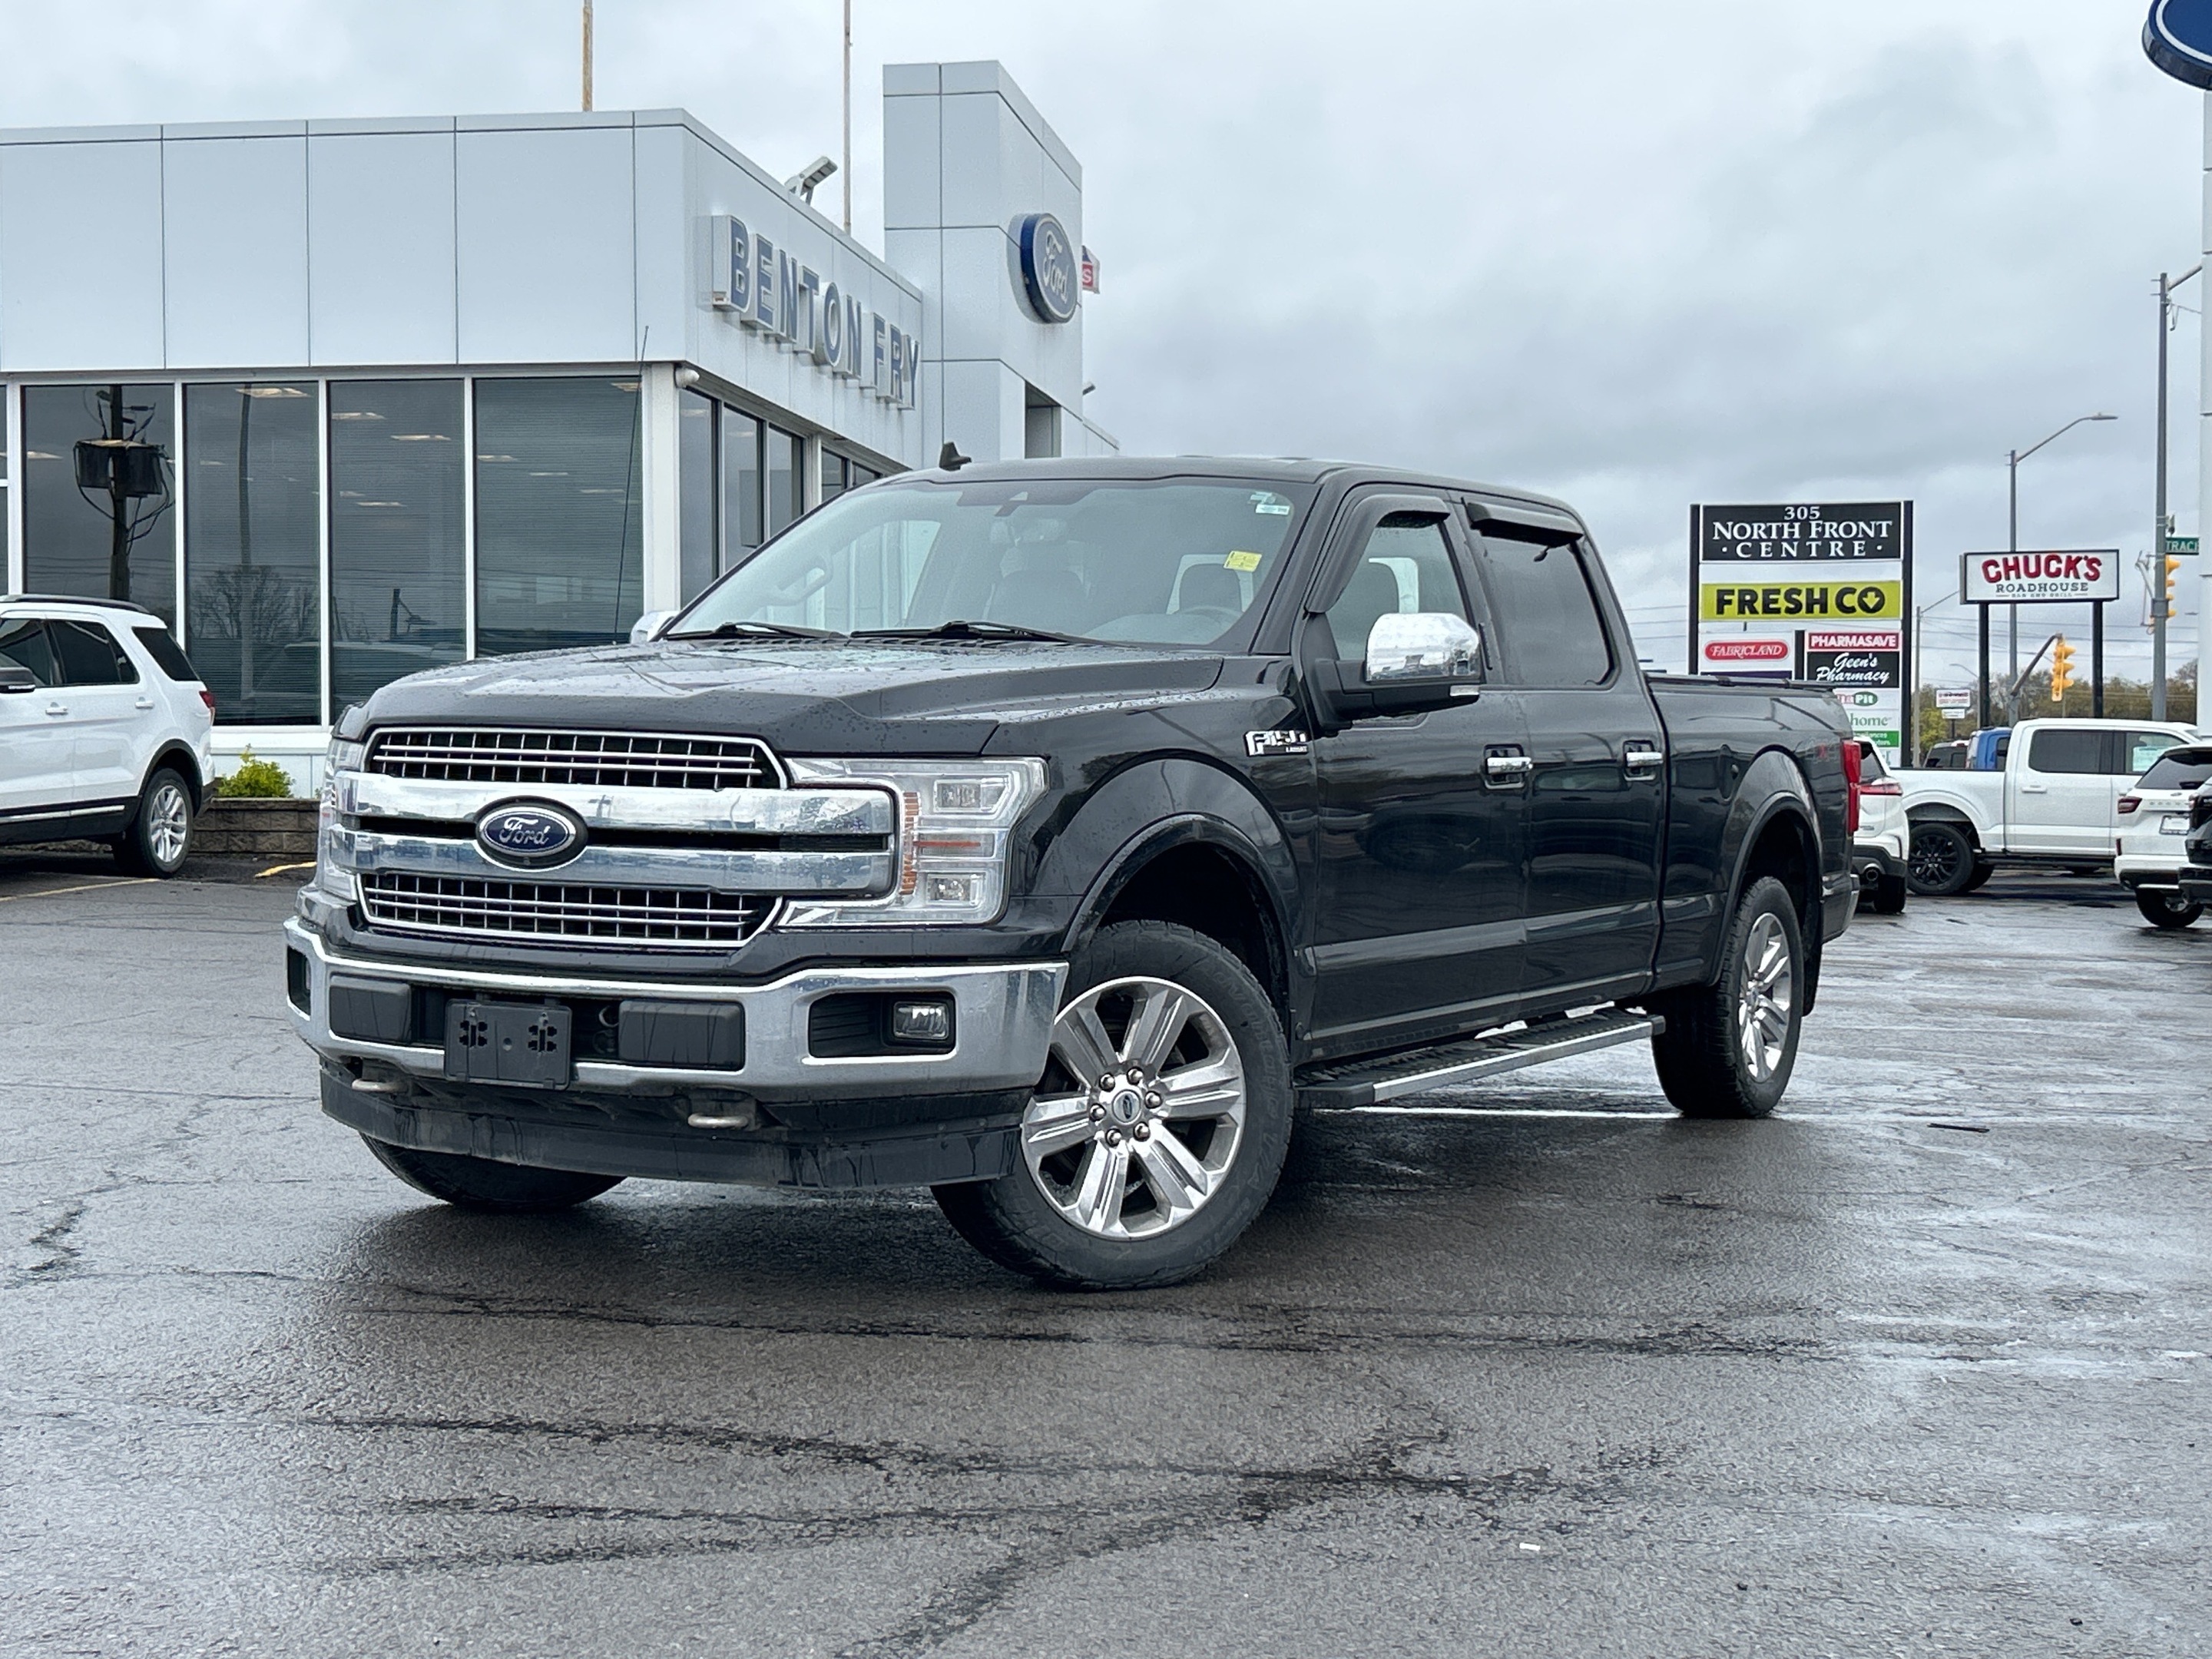 2019 Ford F-150 LARIAT - 3.5L ECO, 502A CHROME PKG, SYNC, COOLED S